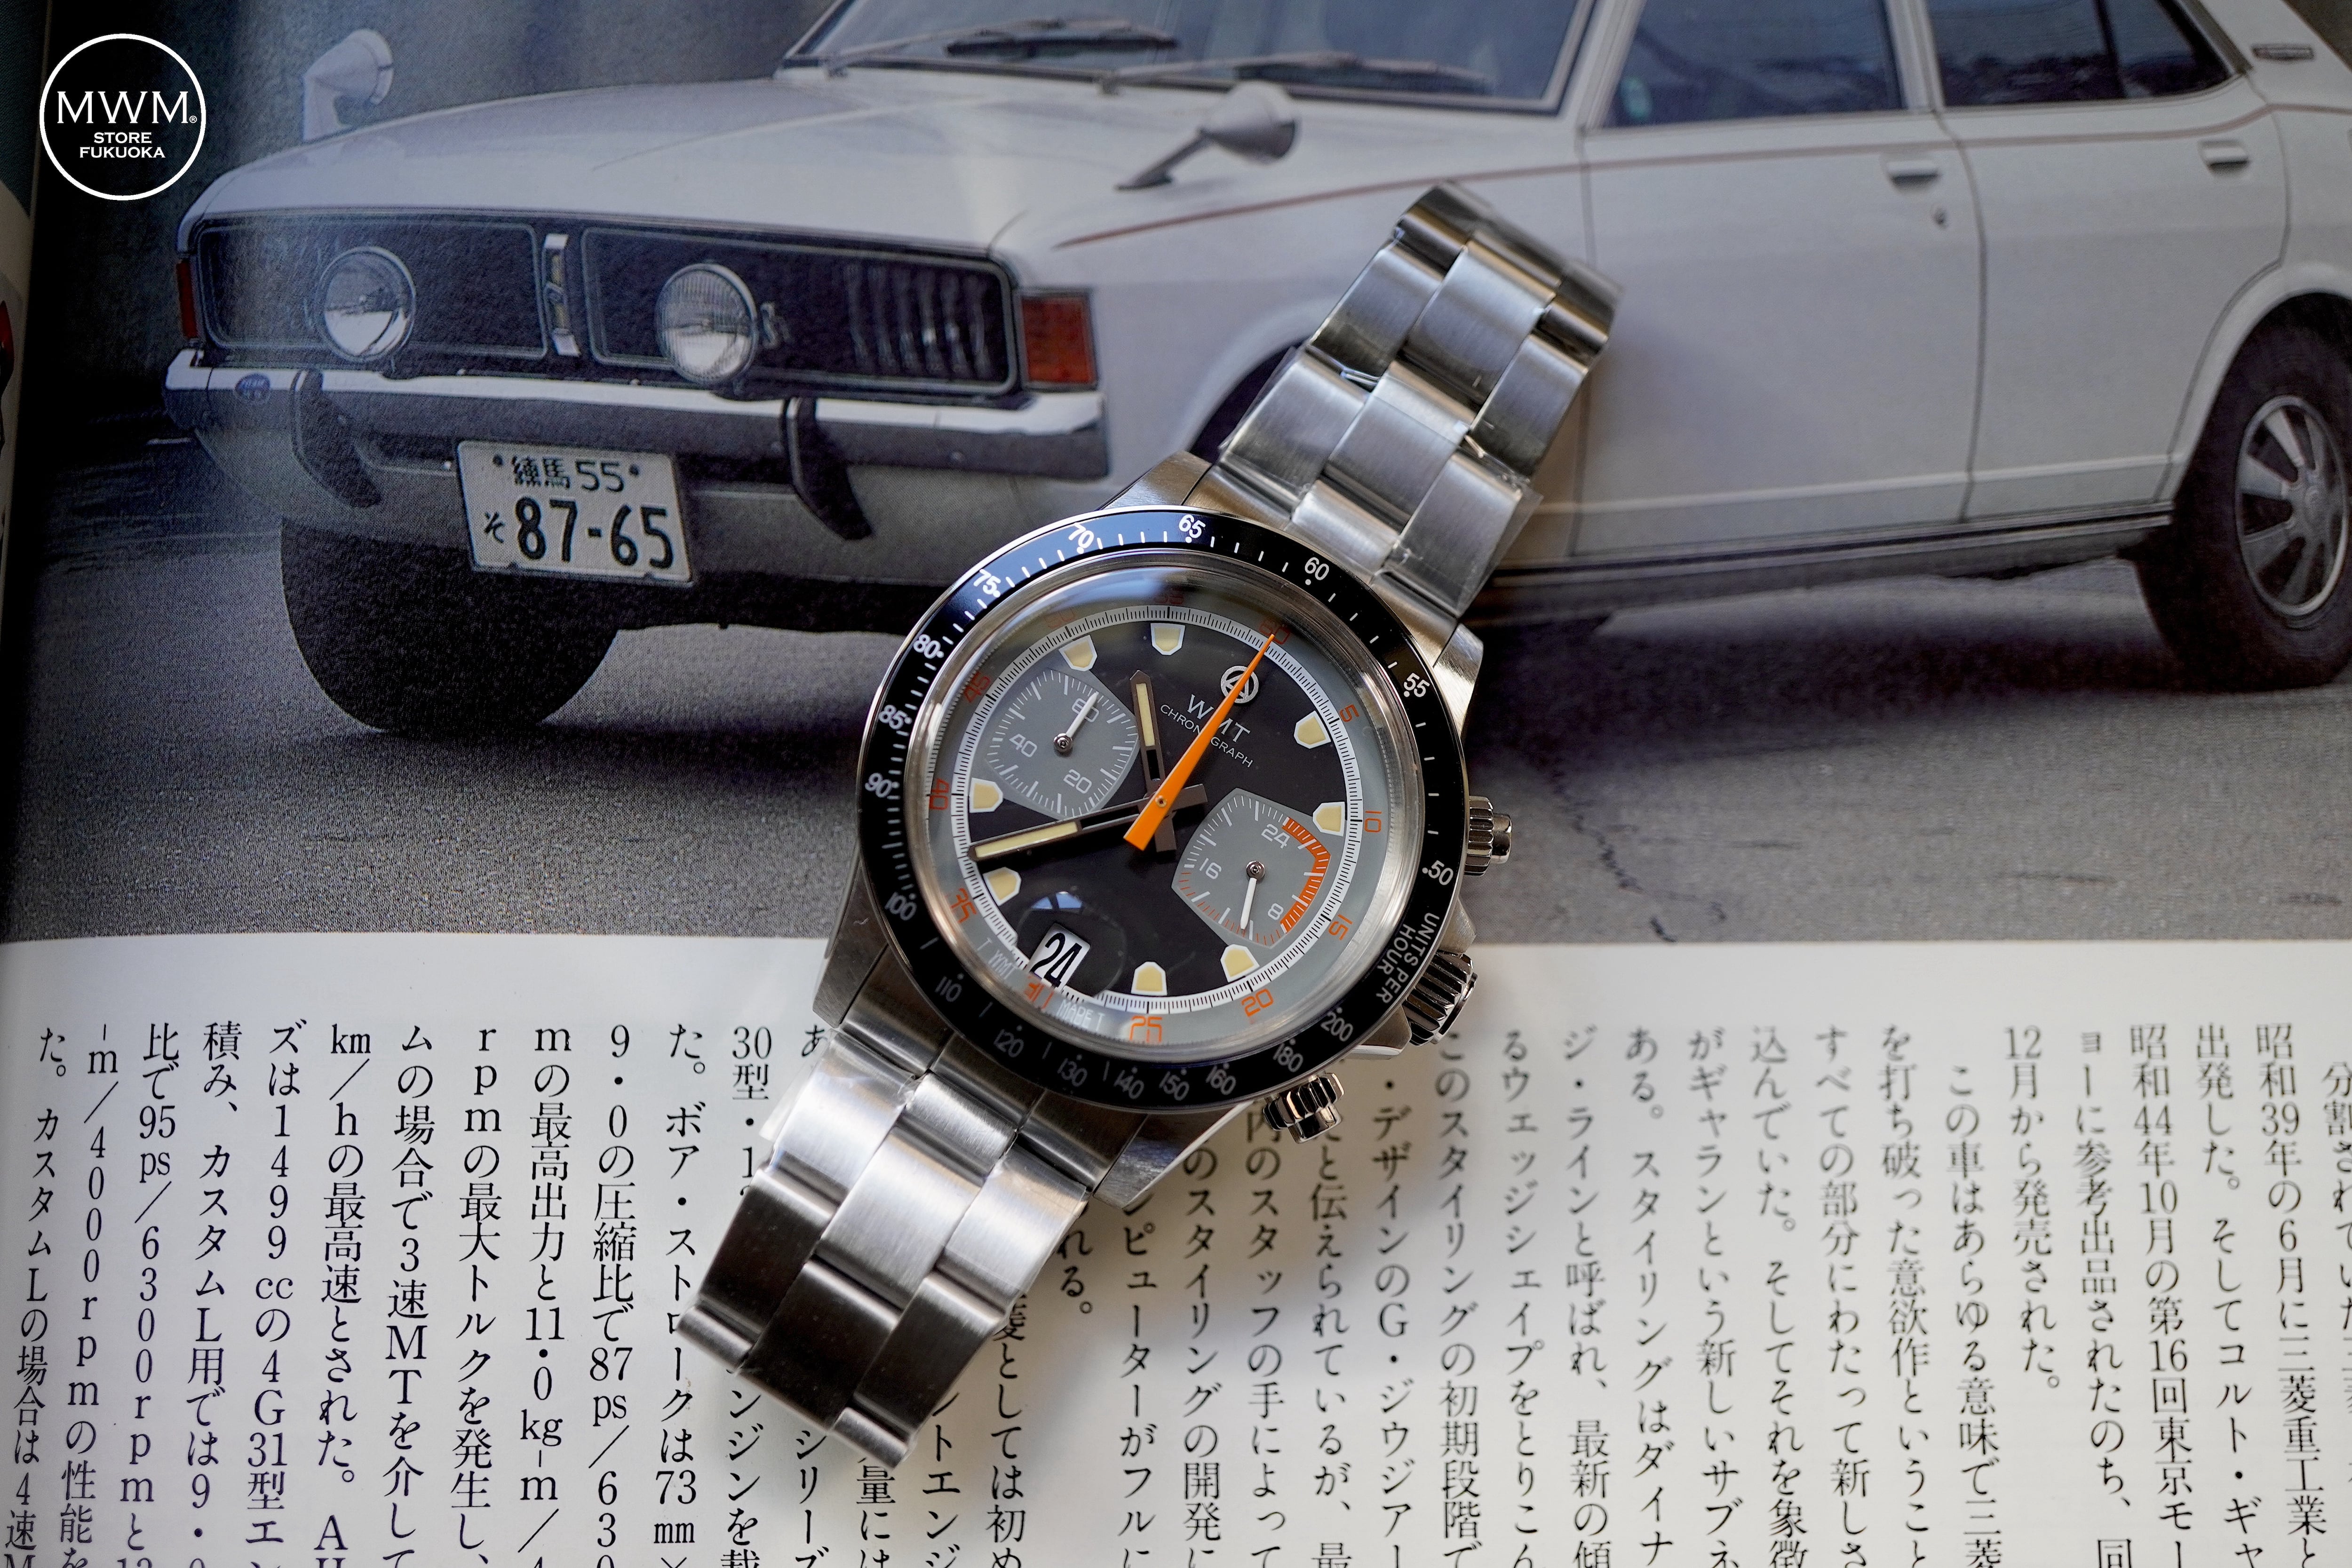 WMT WATCHES Monza V2 – Black Dial / Bezel Insert Aged / Limited ...